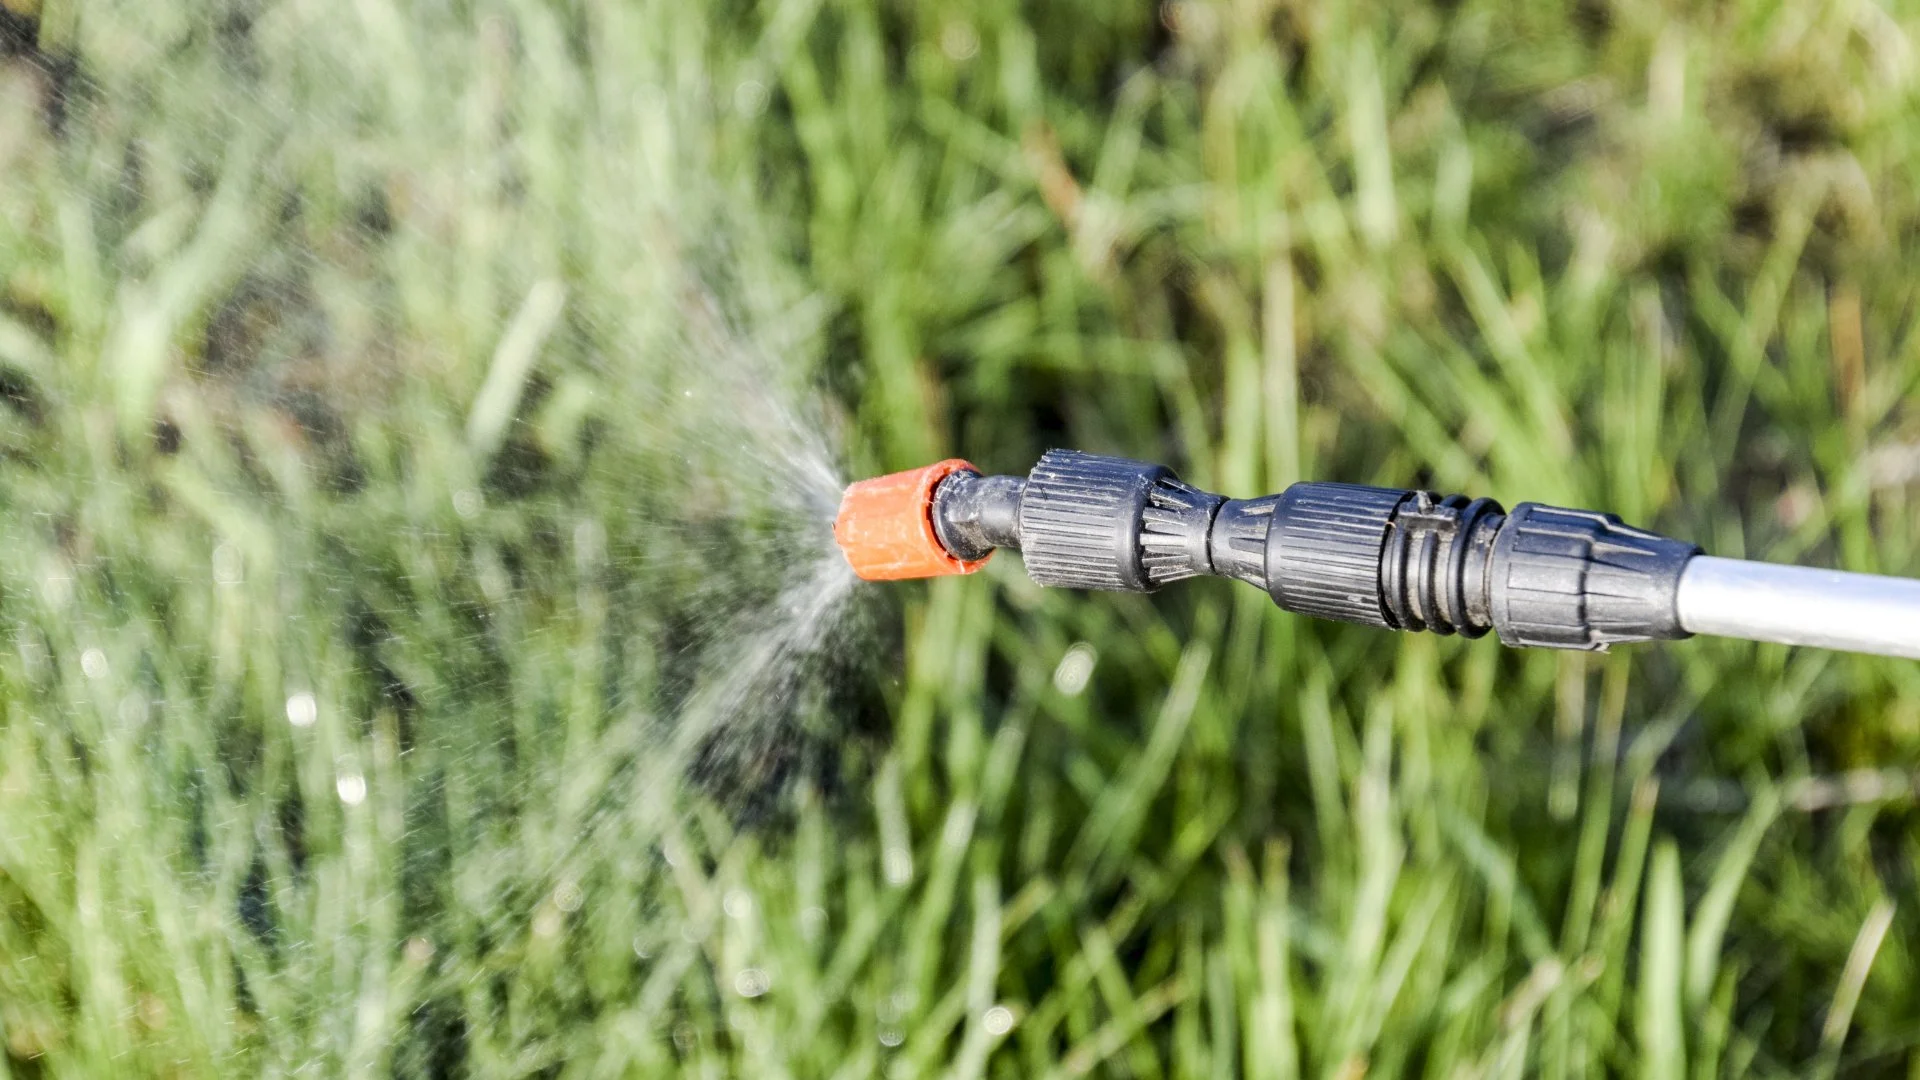 Do You Need to Use Pre-Emergent or Post-Emergent Weed Control in the Fall?